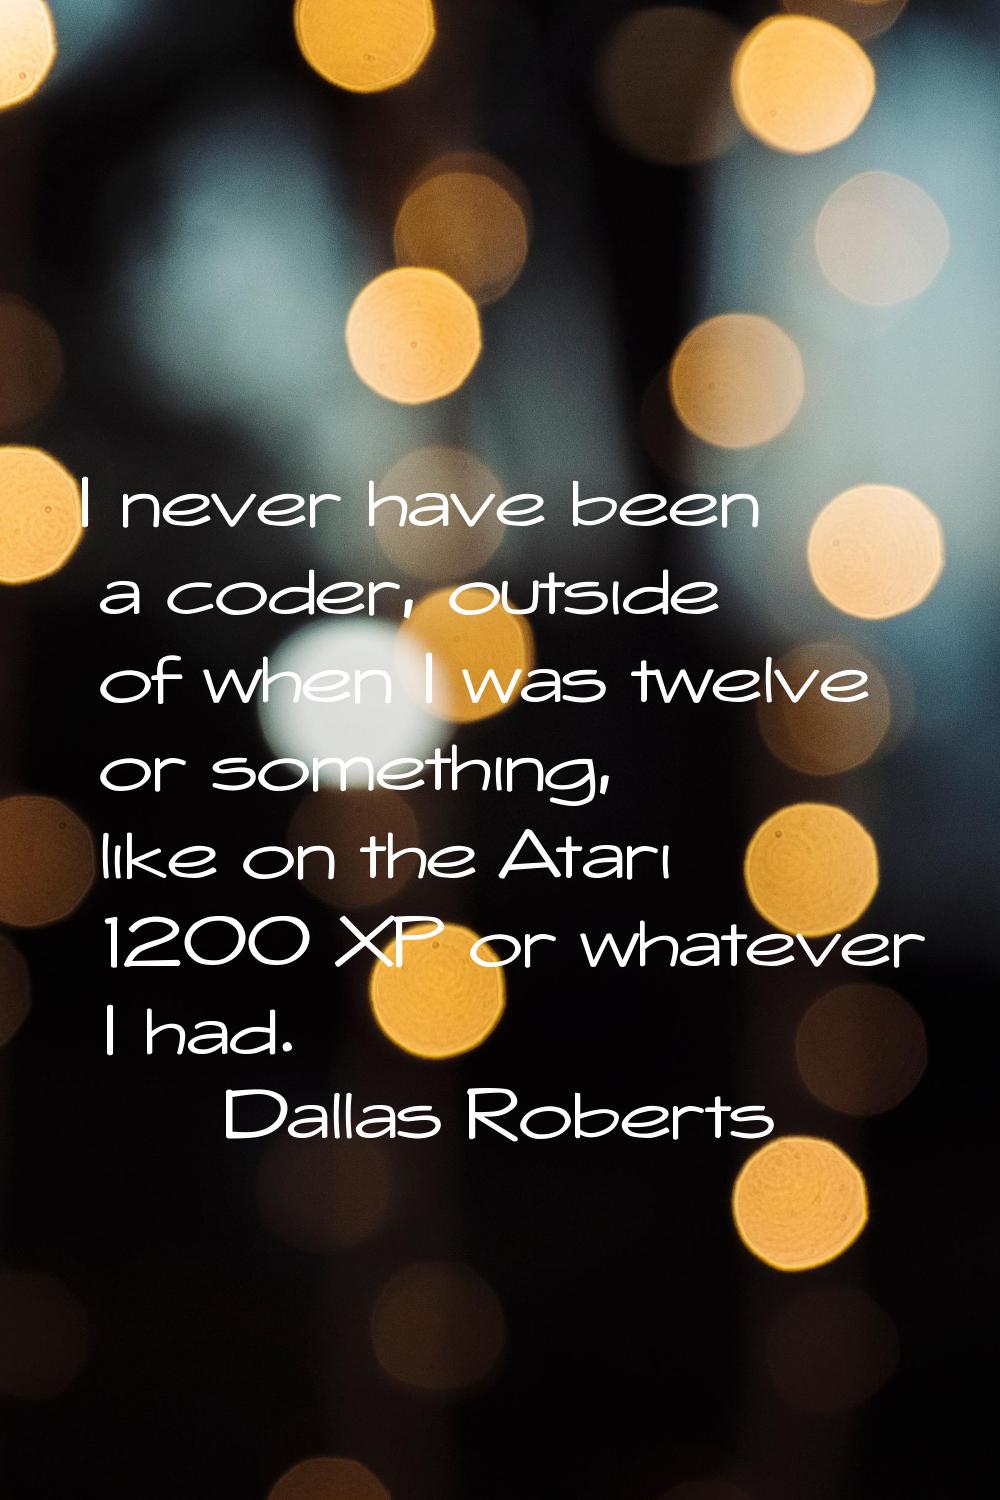 I never have been a coder, outside of when I was twelve or something, like on the Atari 1200 XP or 